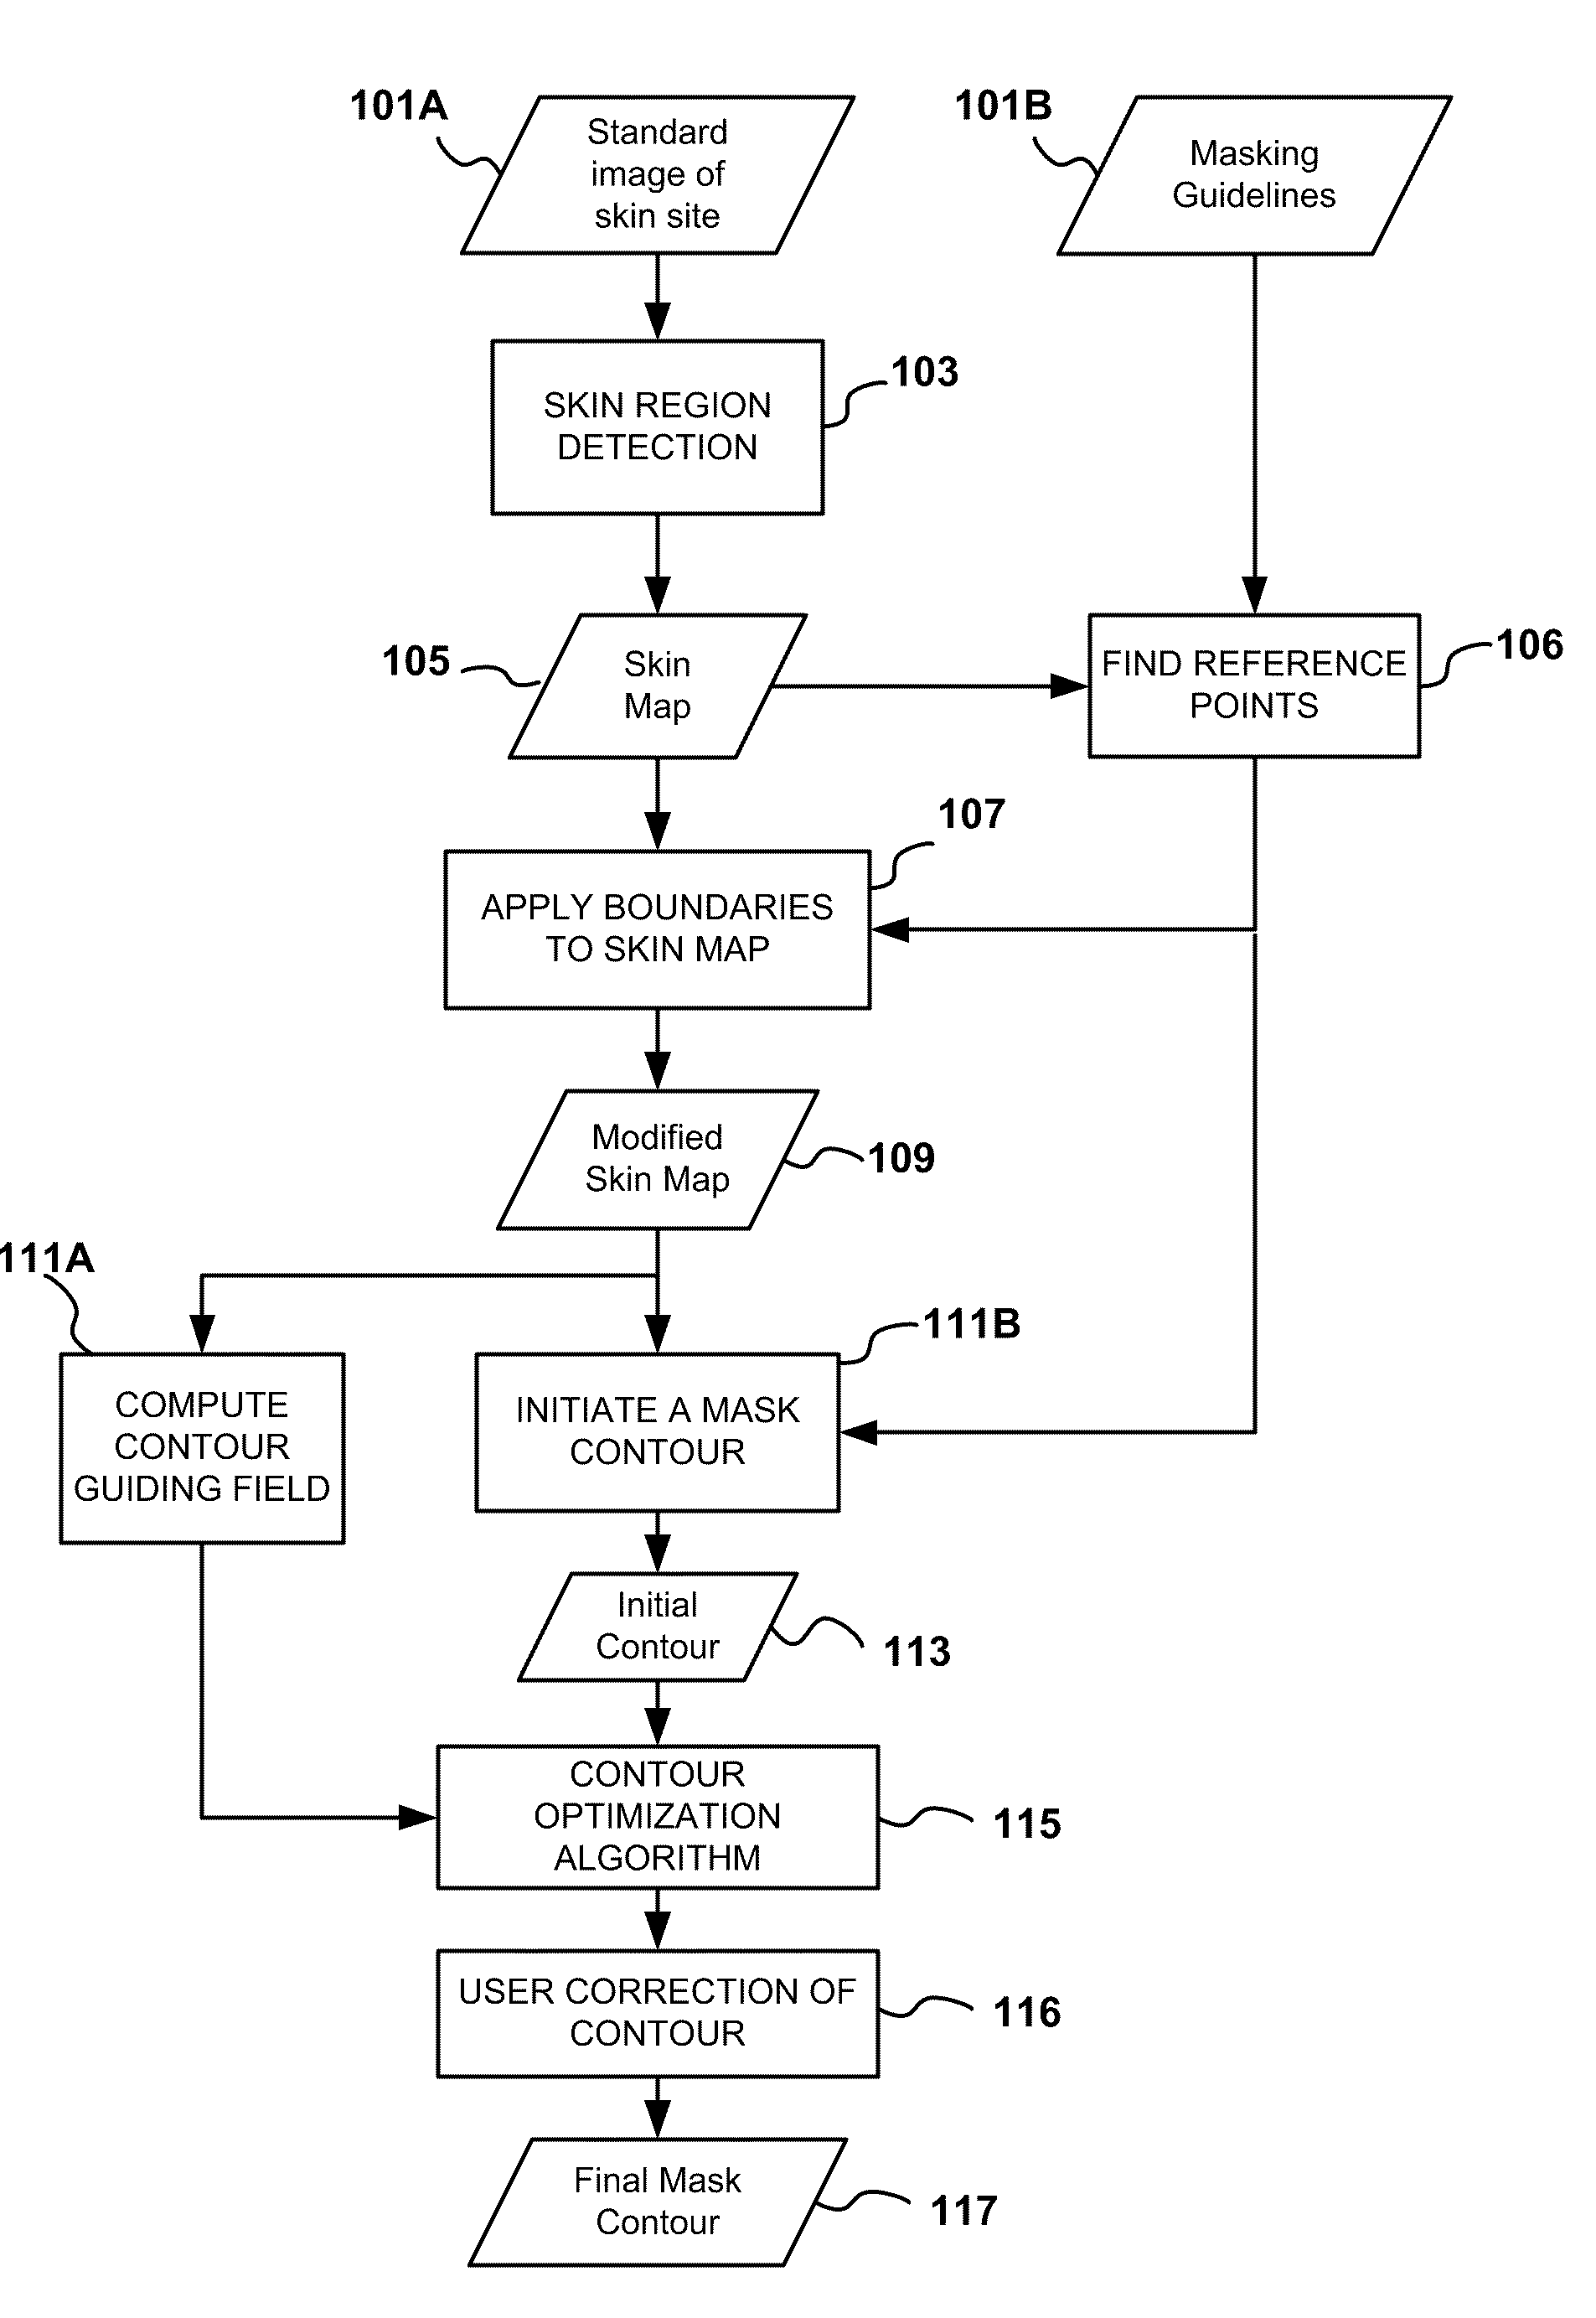 Automatic mask design and registration and feature detection for computer-aided skin analysis